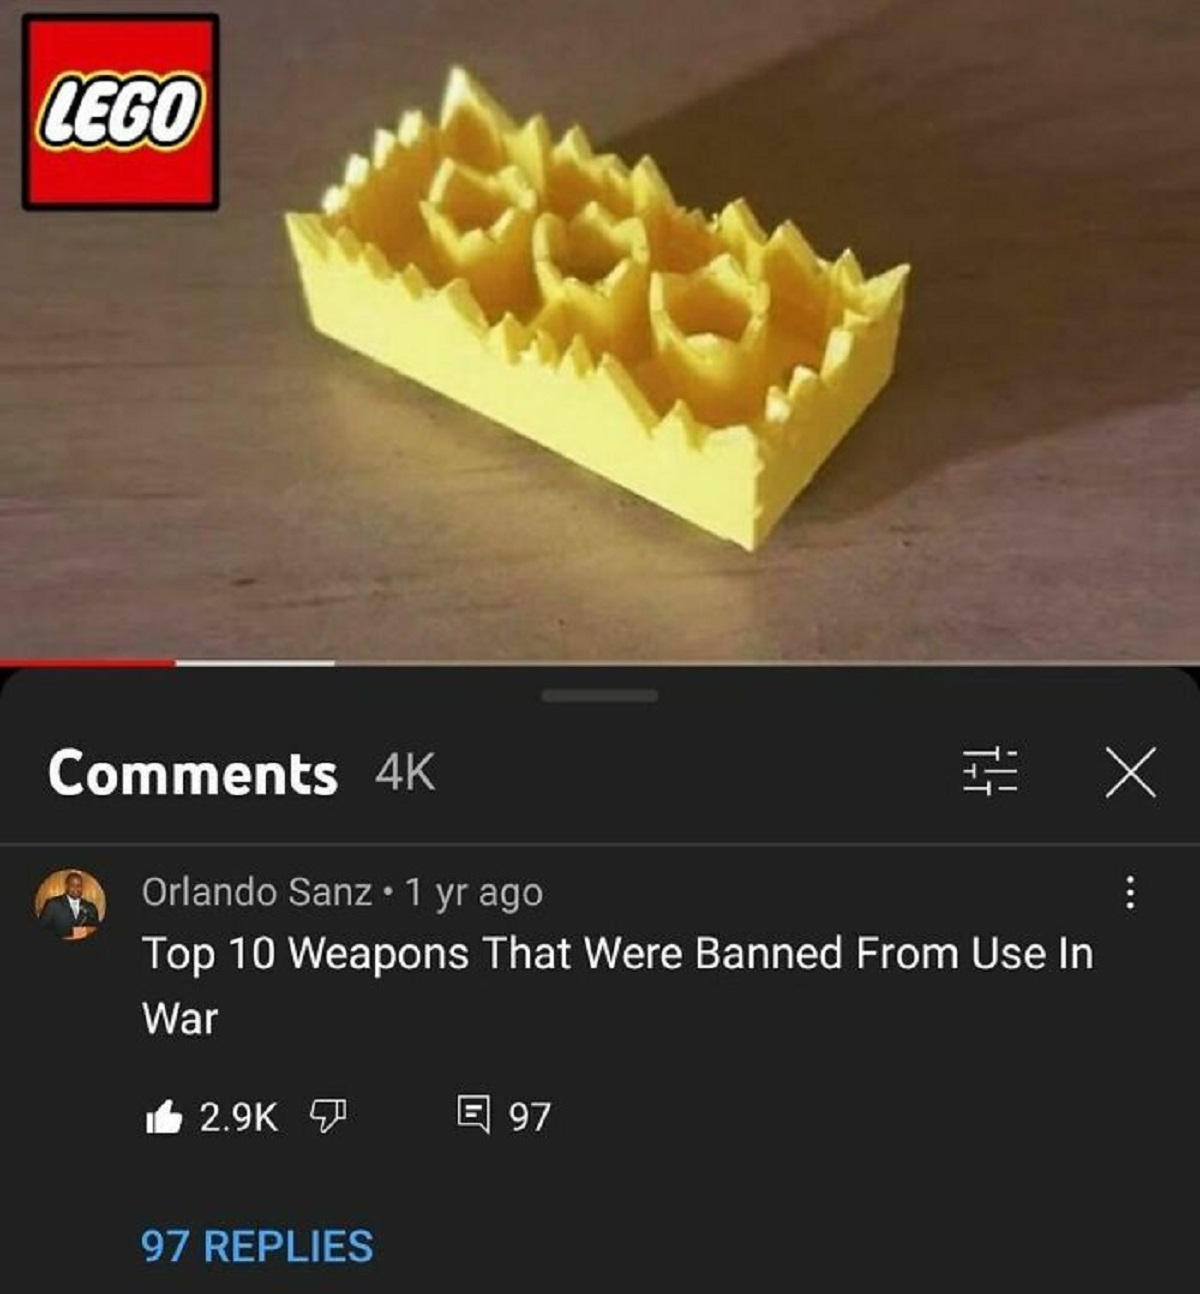 jagged lego brick - Lego 4K Orlando Sanz 1 yr ago Top 10 Weapons That Were Banned From Use In War E 97 97 Replies